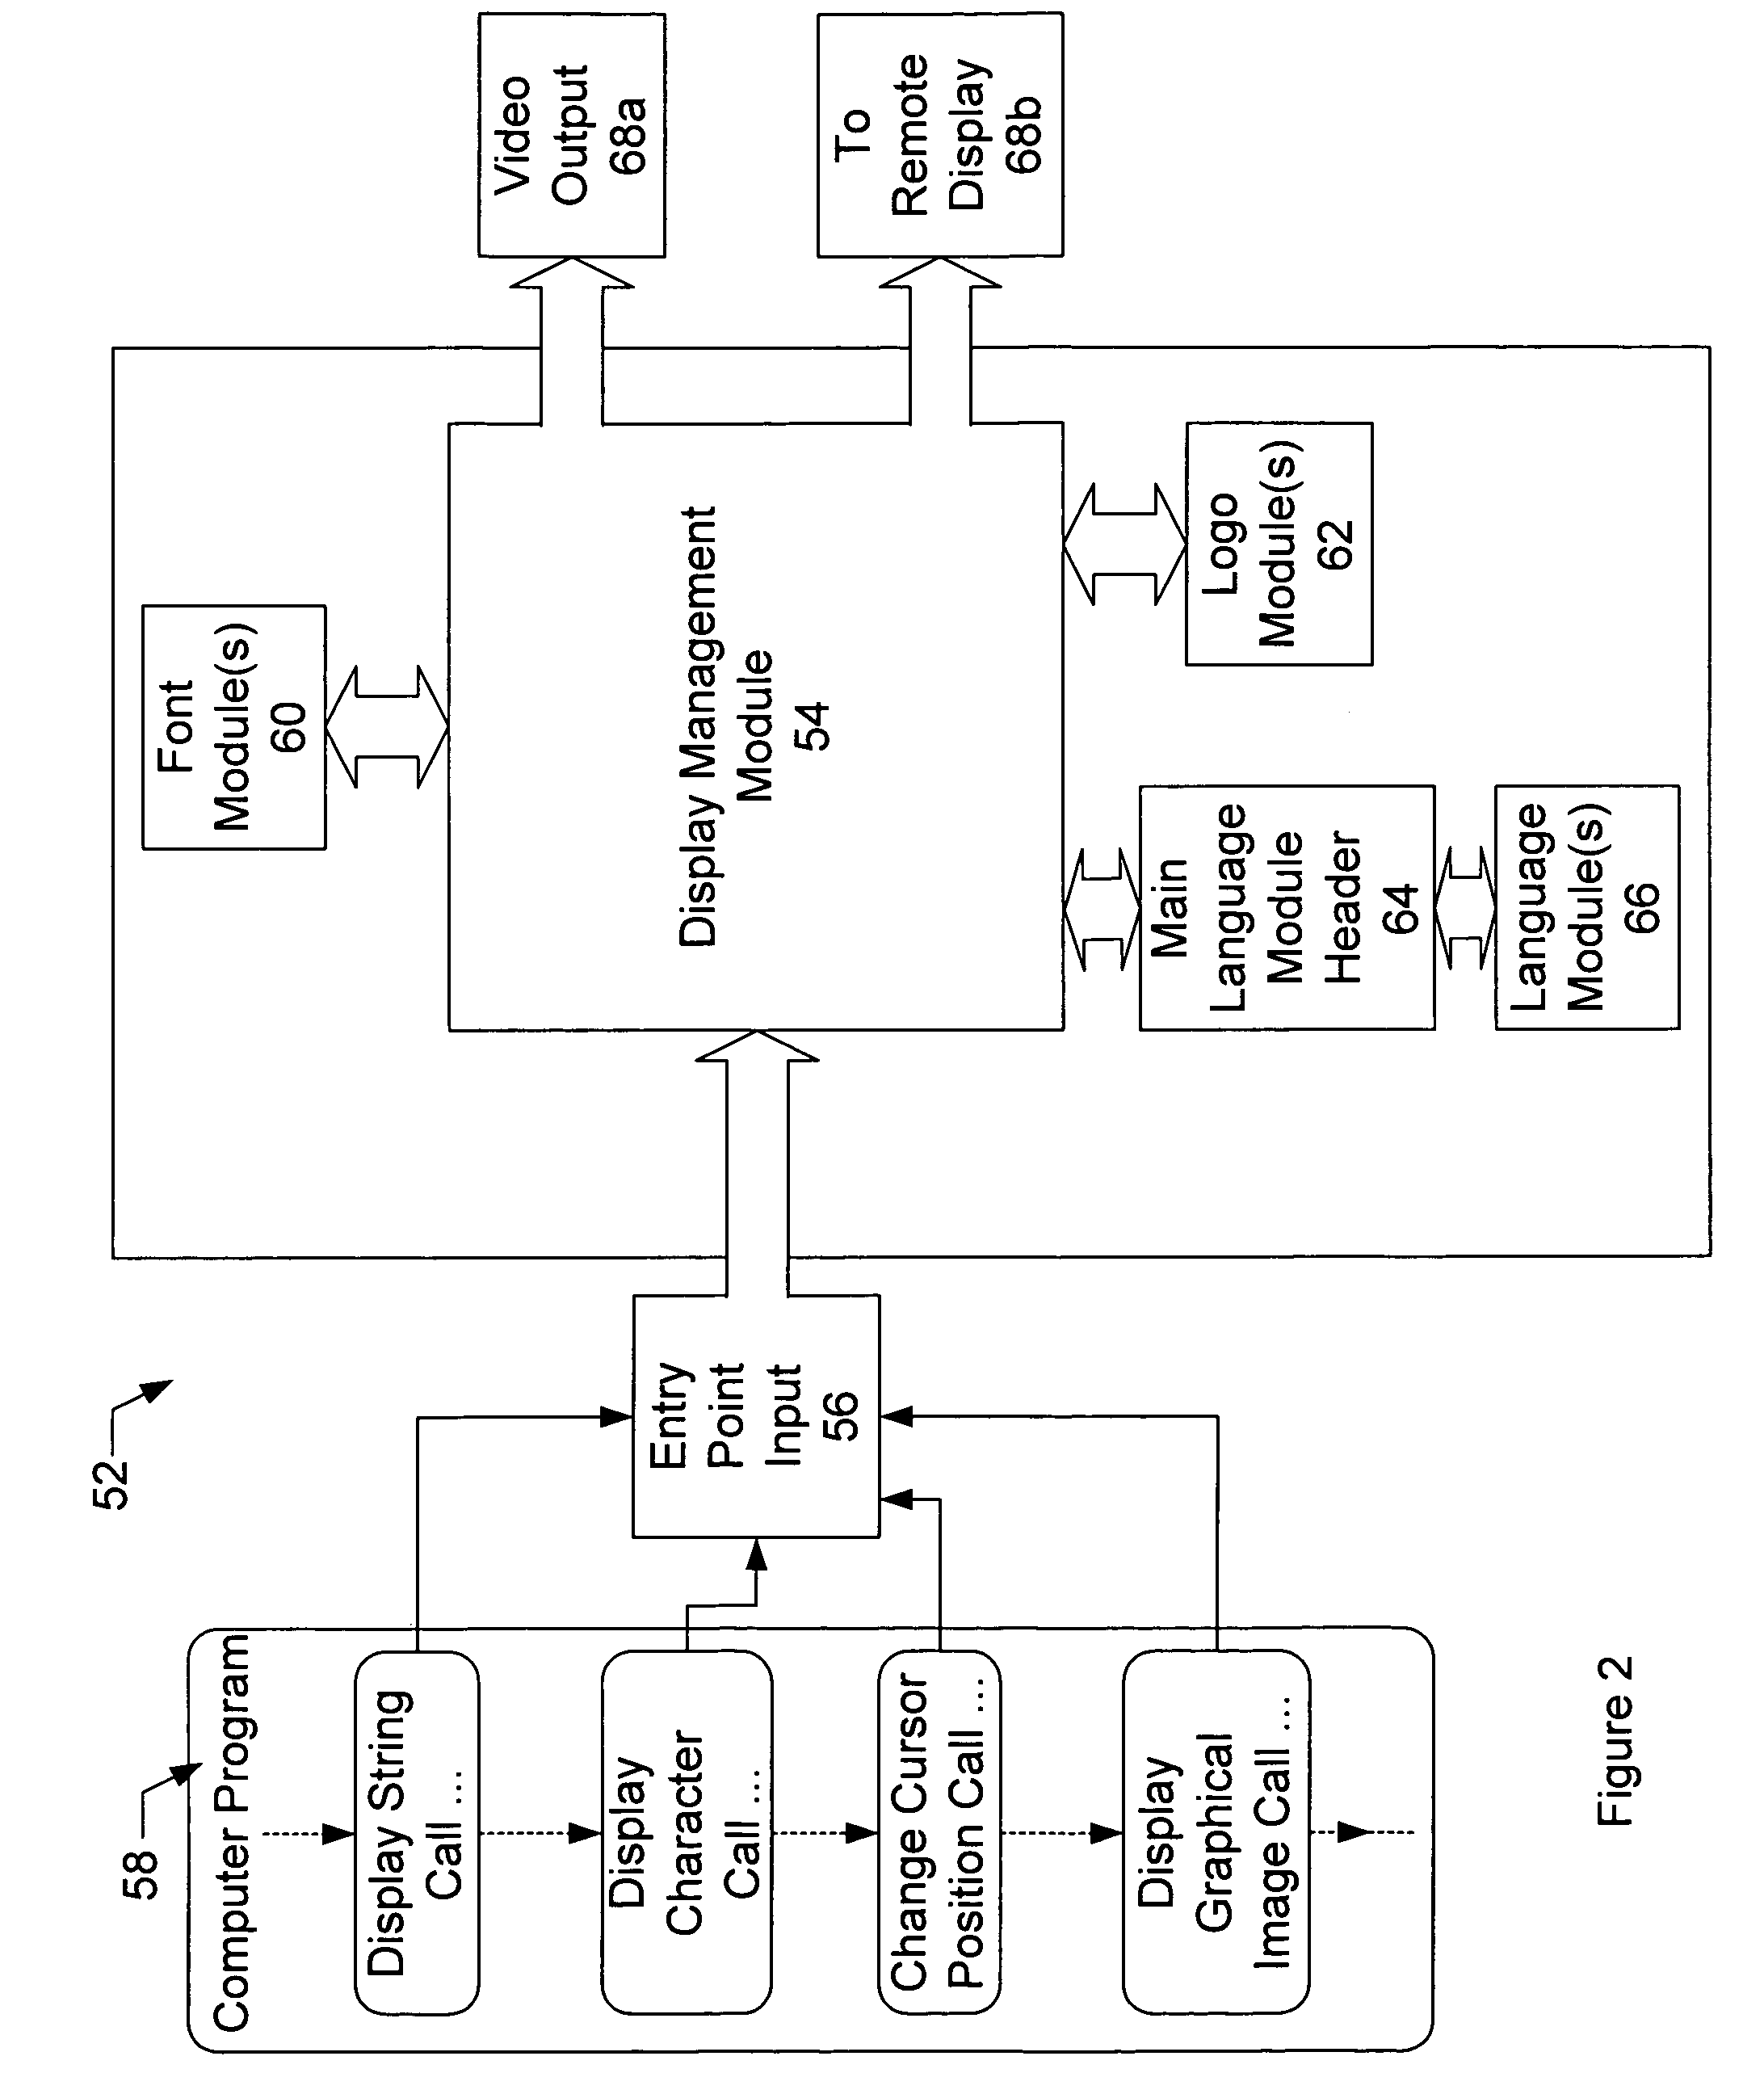 Data structure, methods, and computer program products for storing text data strings used to display text information on a display terminal